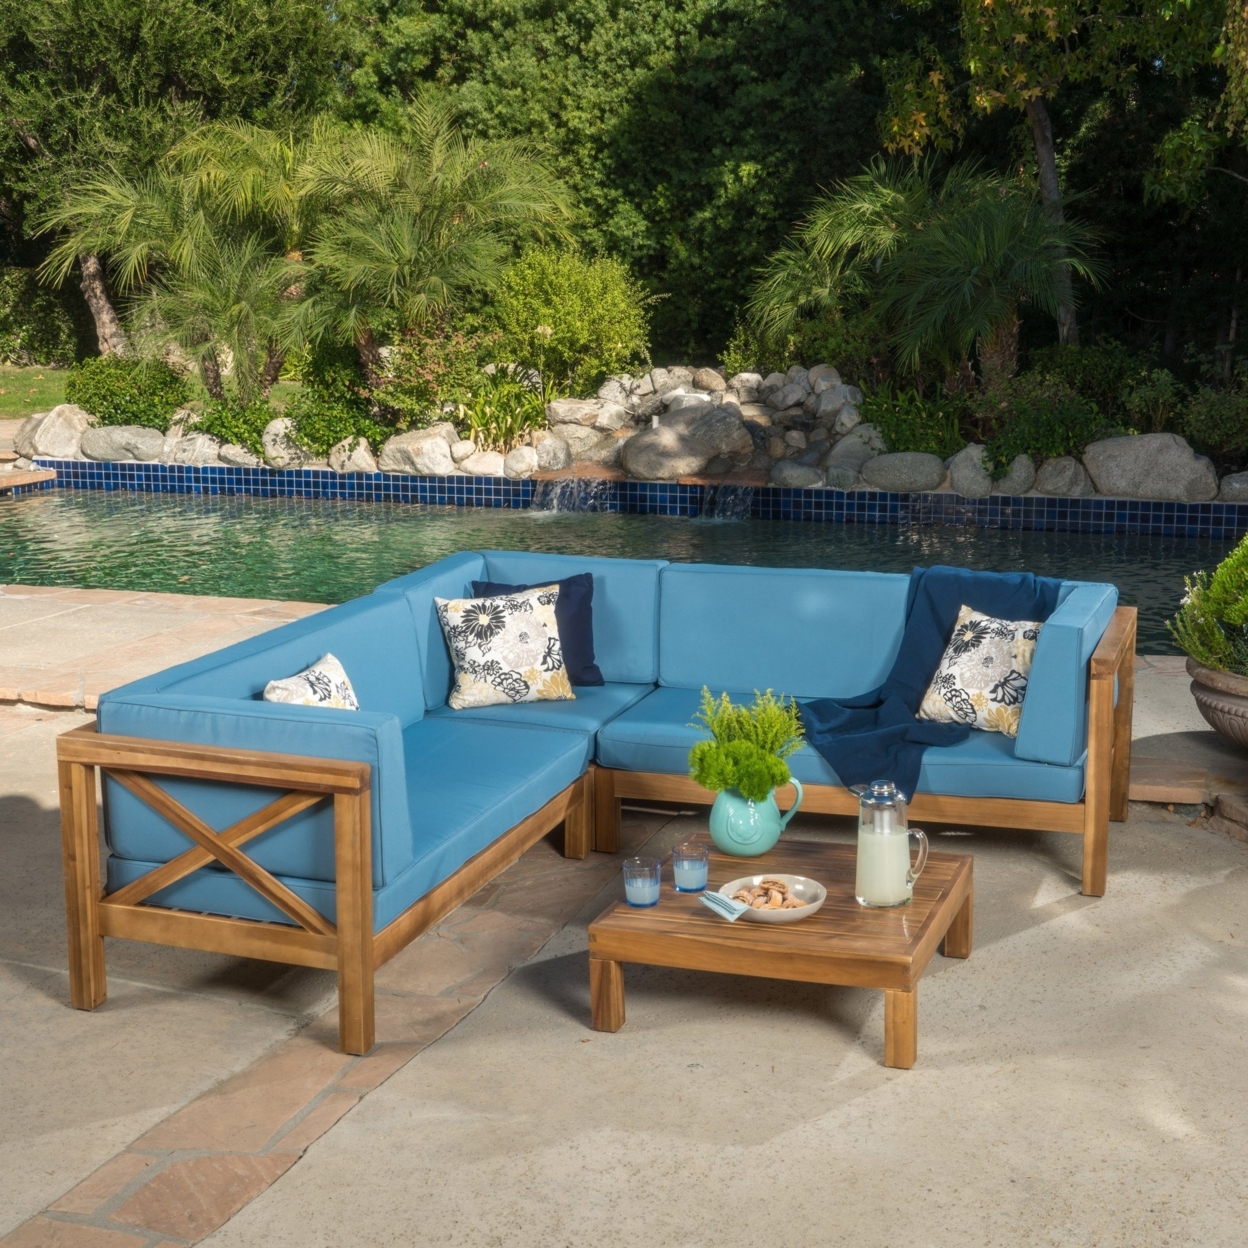 Brava Outdoor 4 Piece V-Shaped Acacia Wood Sectional Sofa And Coffee Table Set - Red, Natural